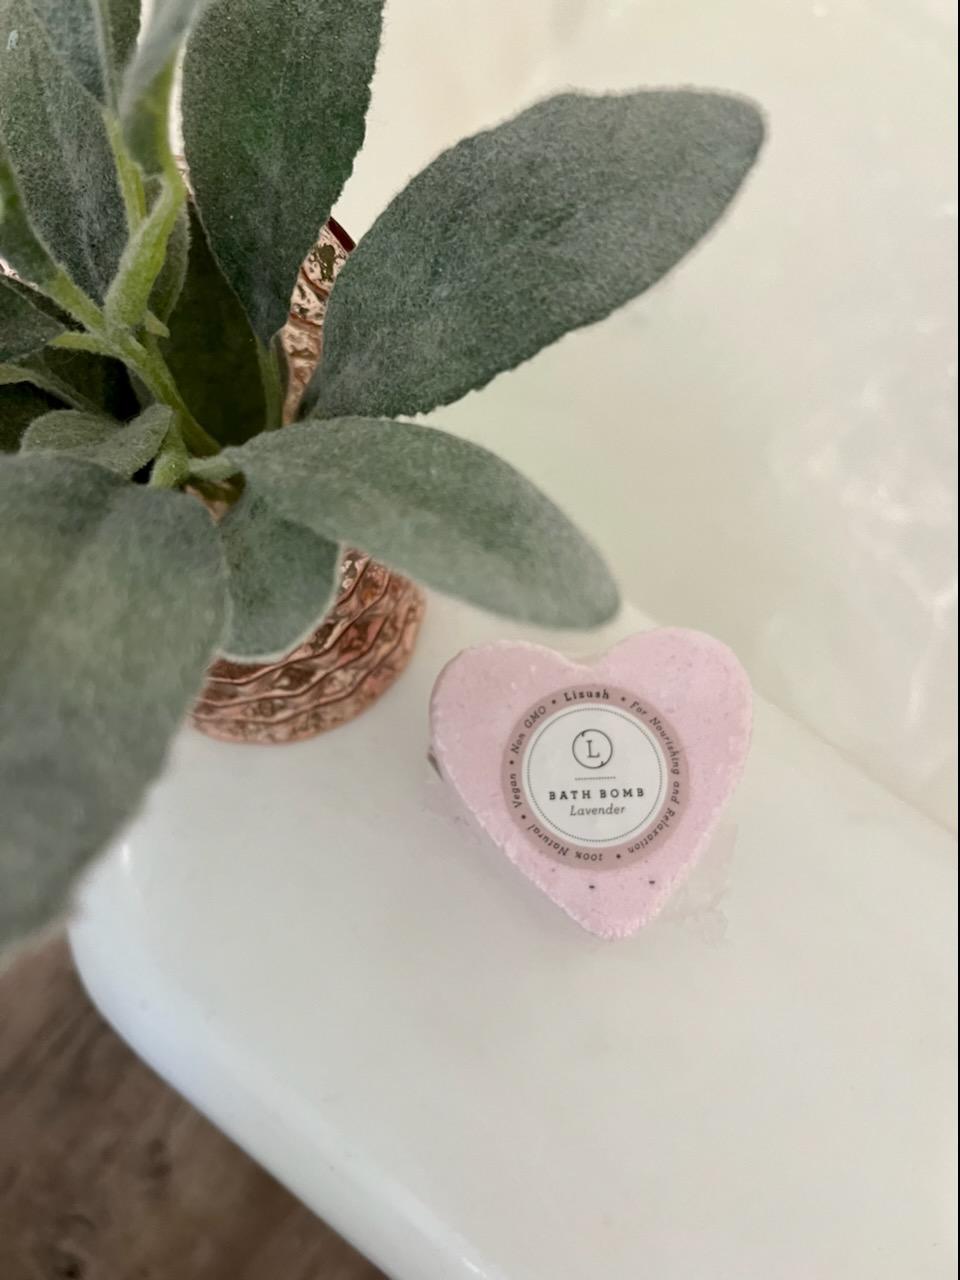 Heart shaped bath bomb- Lavender scented